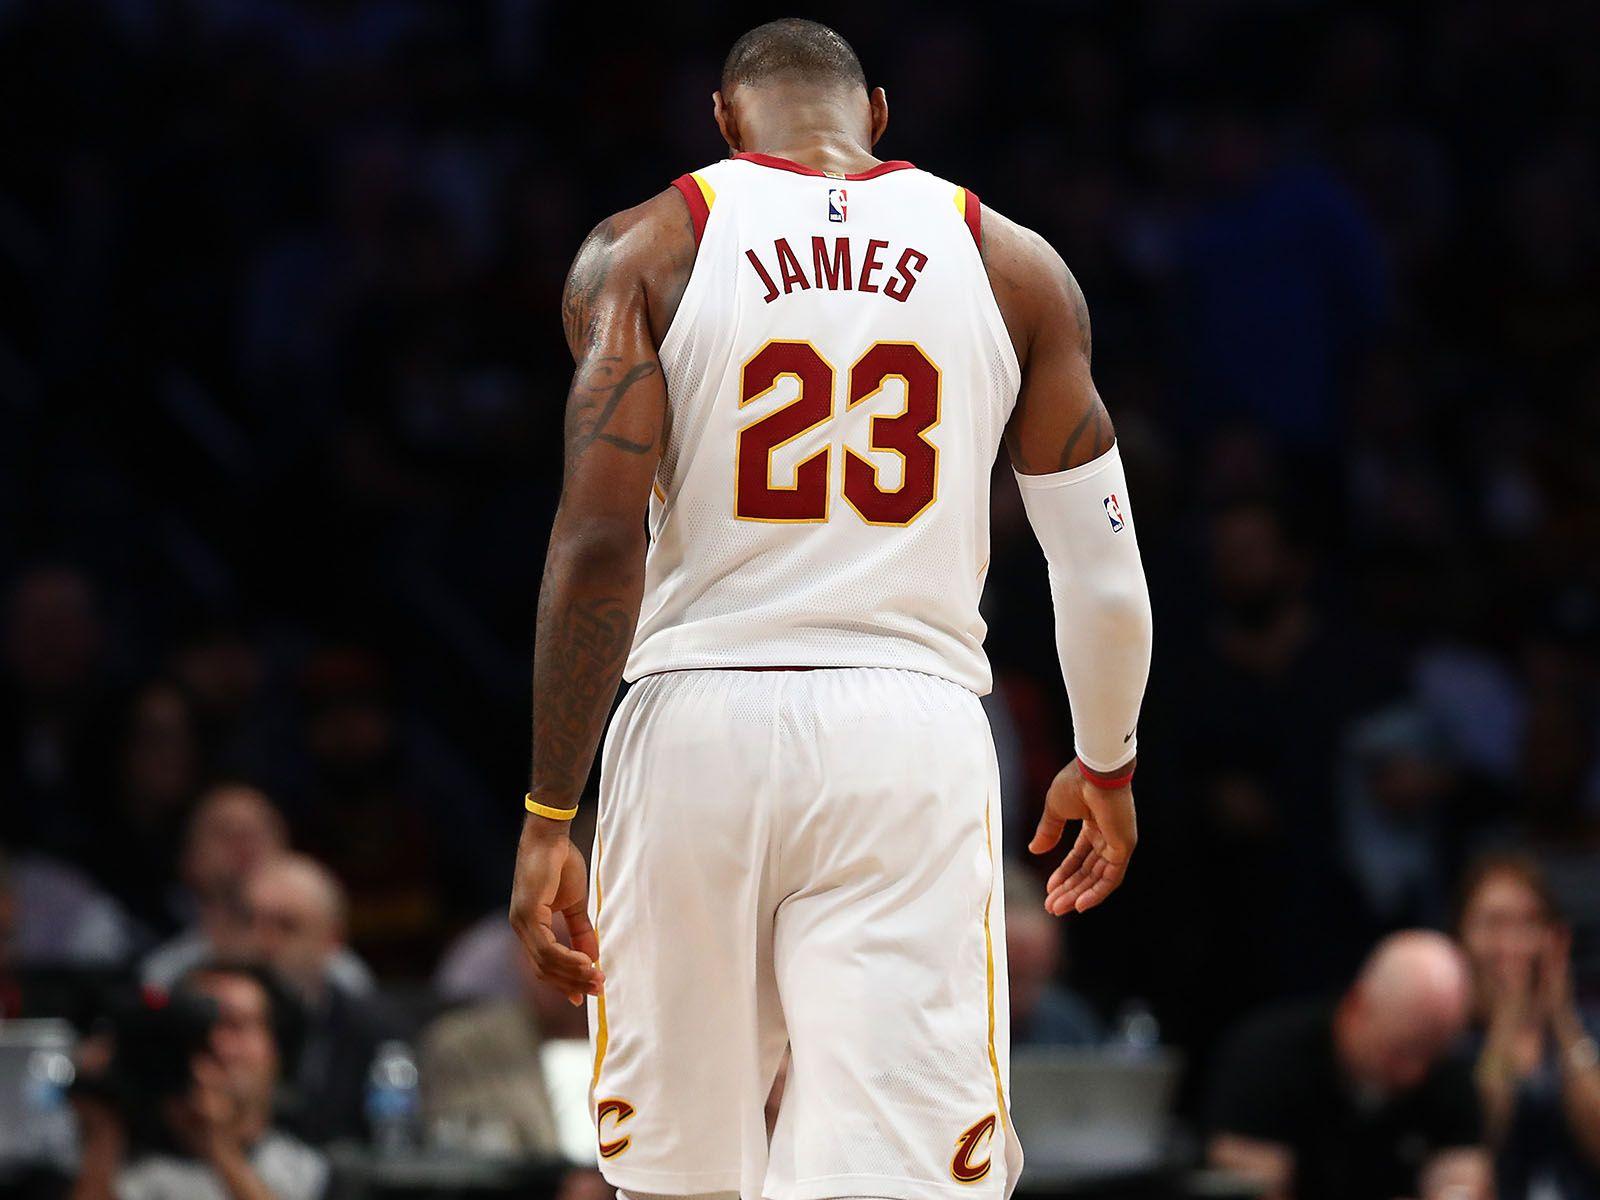 LeBron James Rumors: Will Cavs Star Leave in Free Agency?